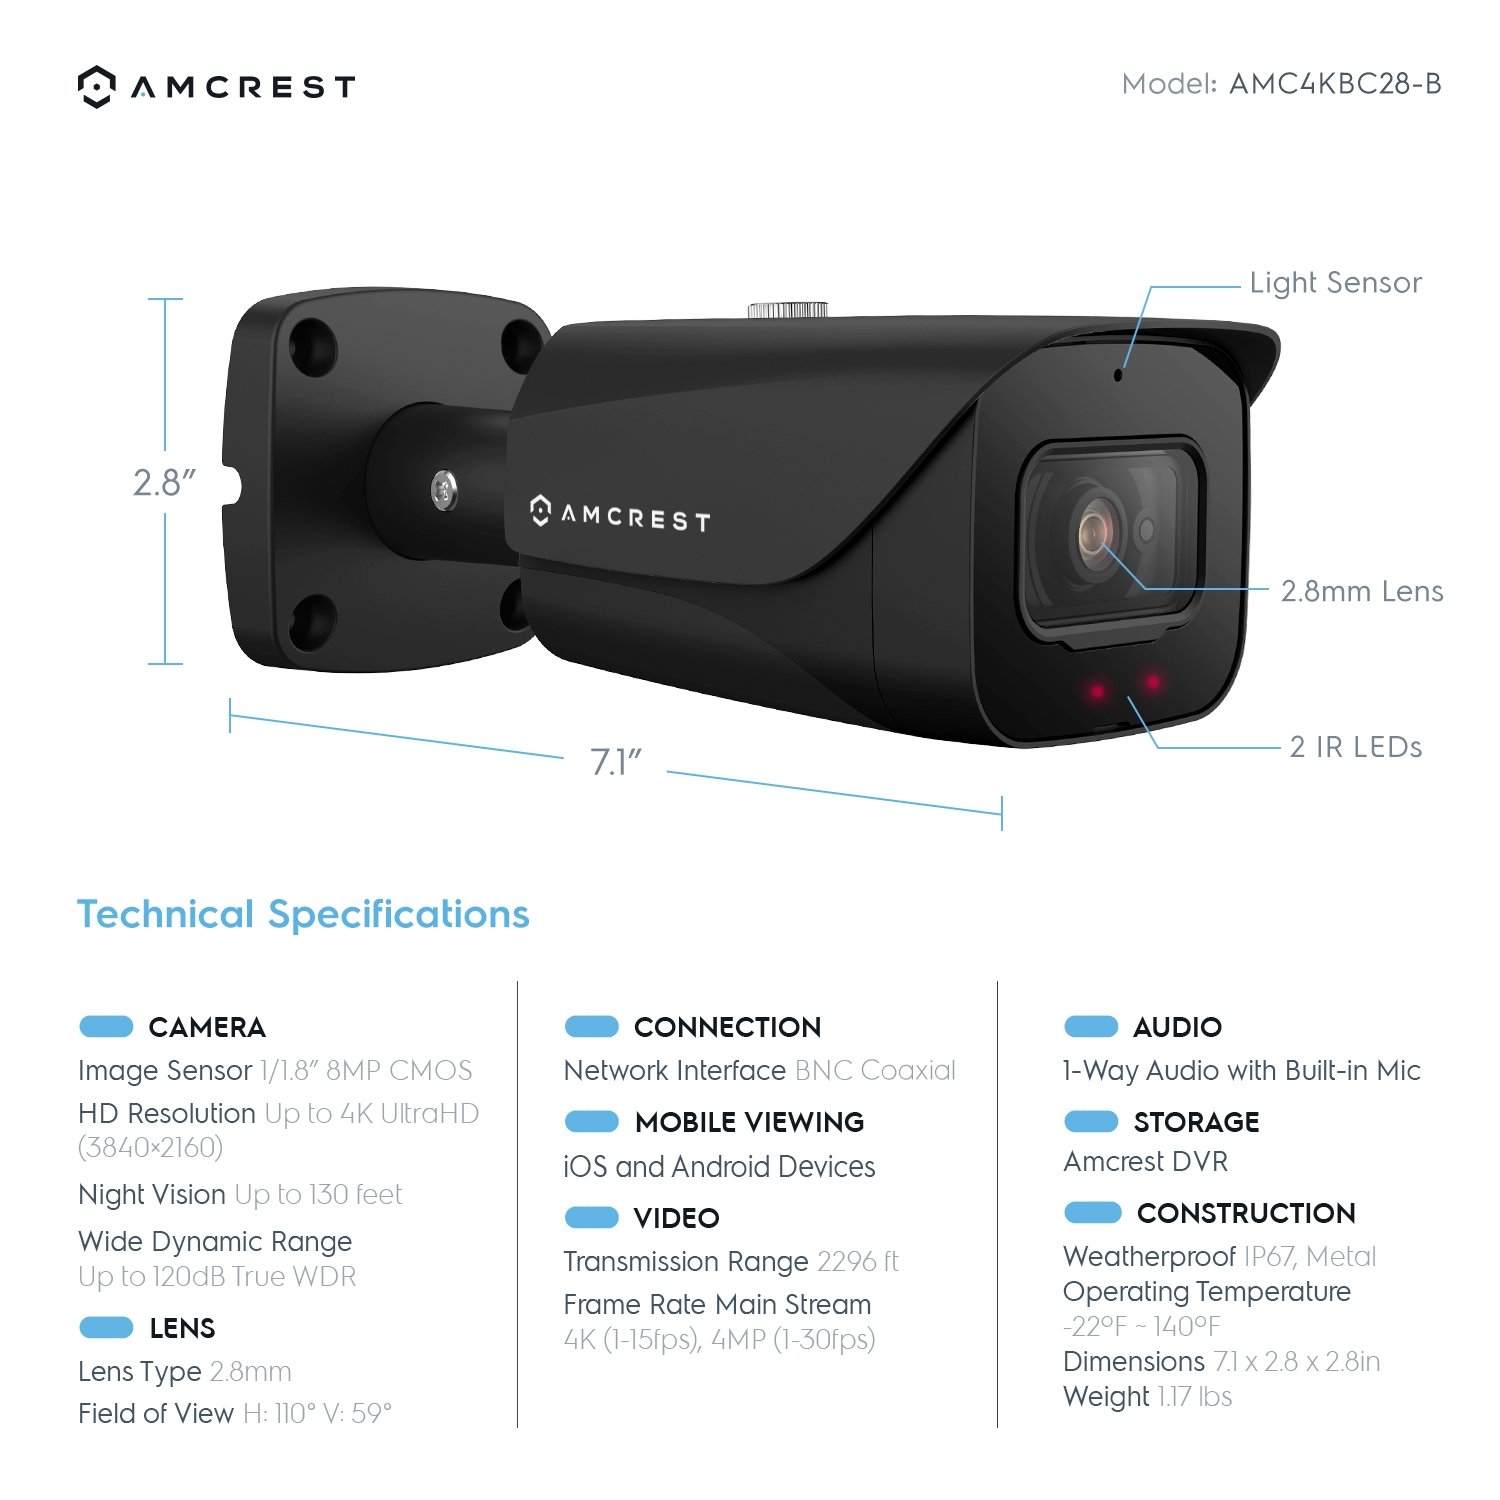 Amcrest ACD-830B 1080P Car Camera & DVR with Nightvision, Motion